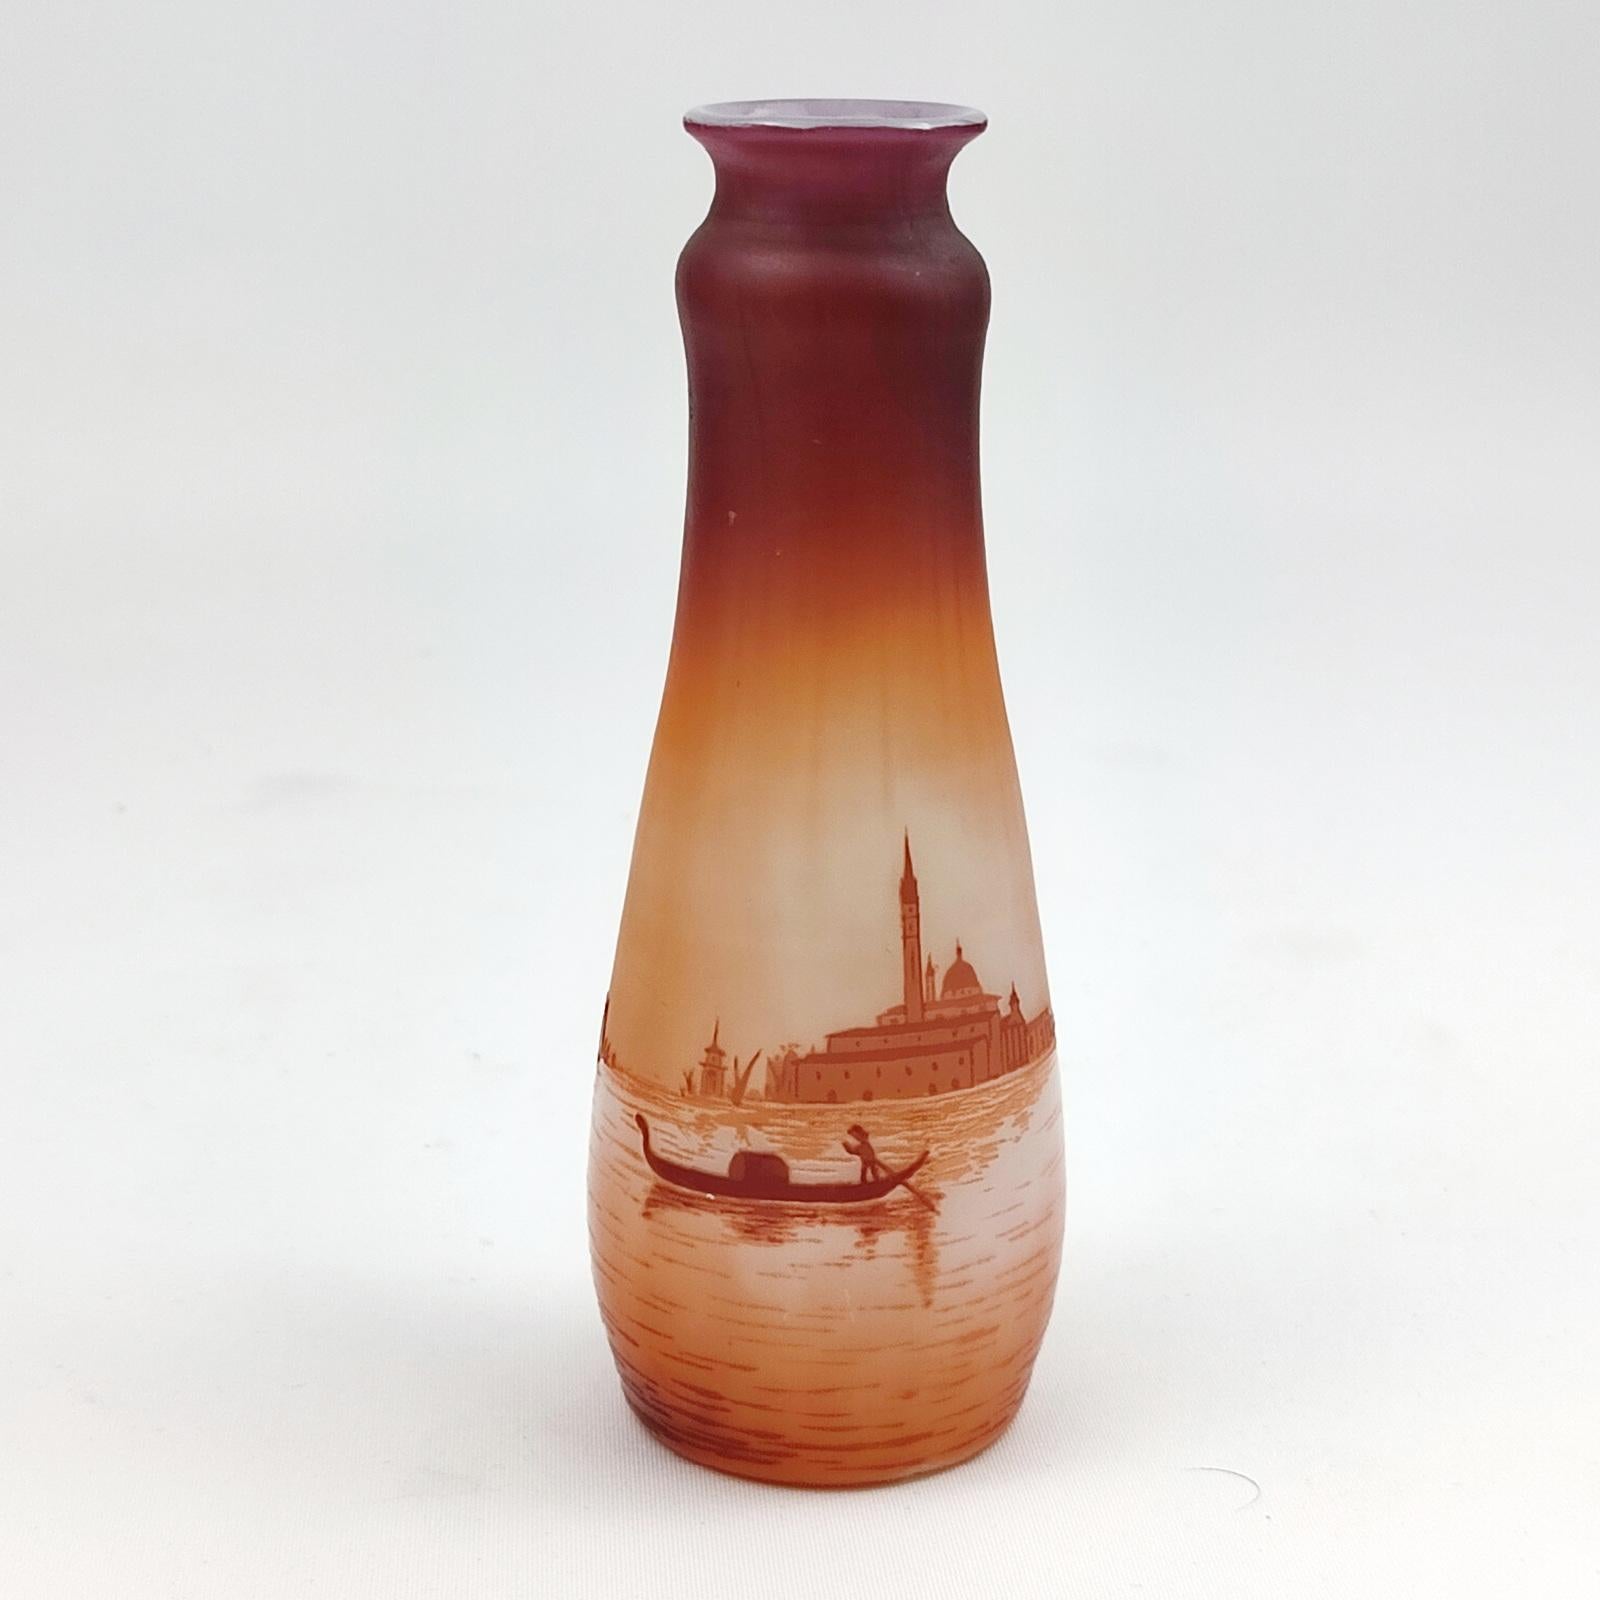 A wonderful D'Argental cameo art glass vase, France, late 19th century. San Giorgio Island scene with gondola and Palazzo San Giorgio in the background. Milky glass with shades of orange and dark red-amethyst. Marked D'Argental and monogrammed.